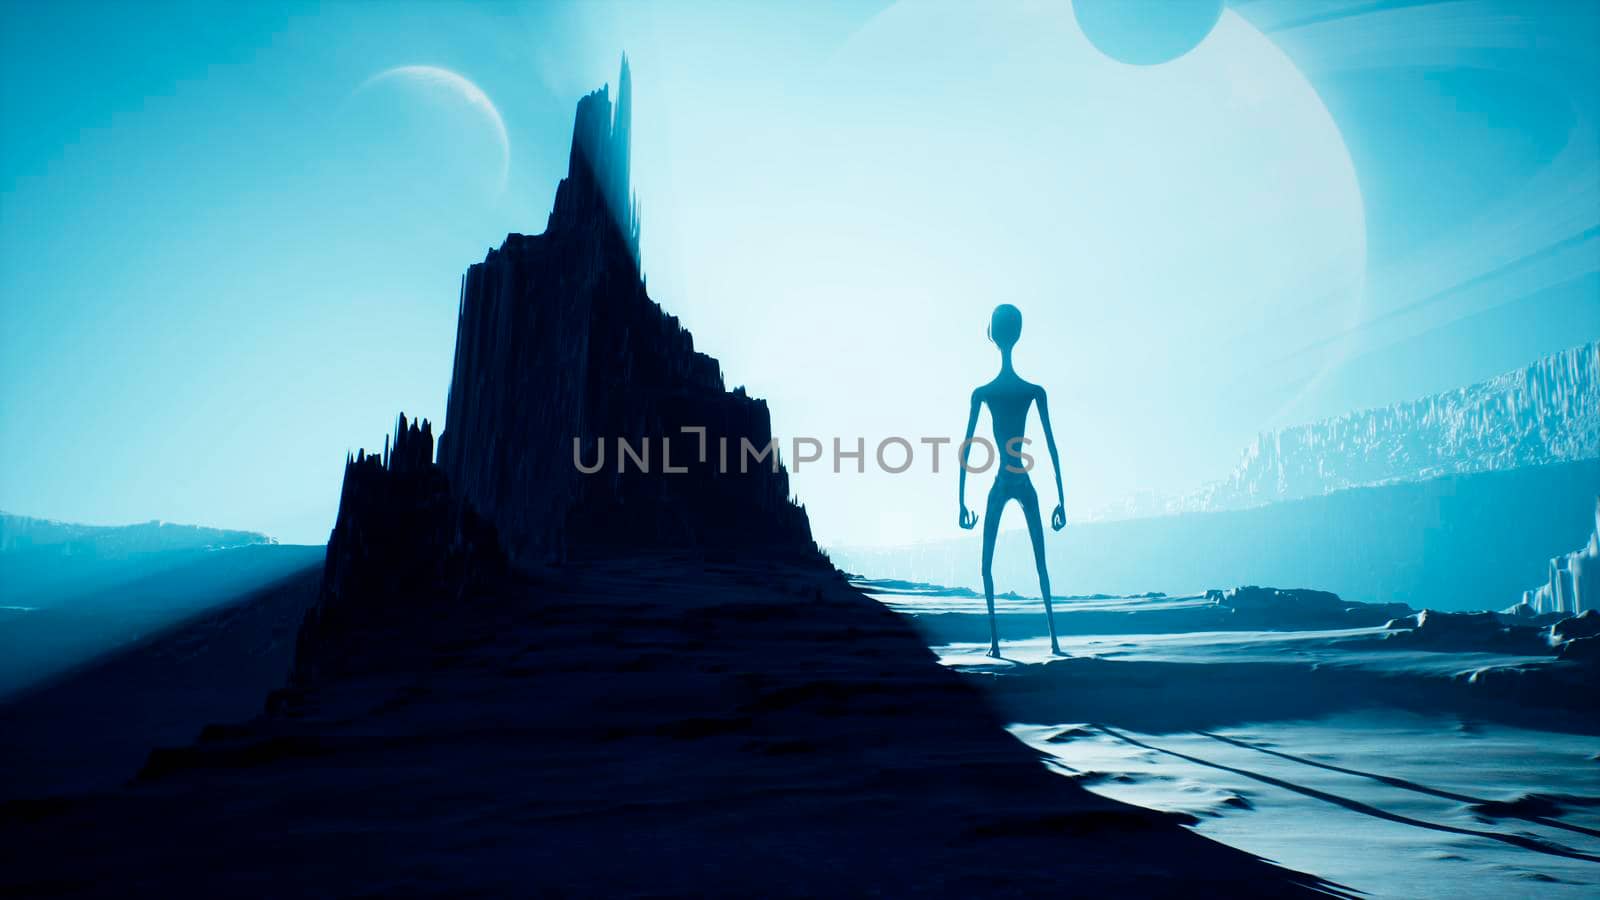 An alien is waiting for the dawn on his unusual planet. Landscape of a beautiful alien planet in far space.